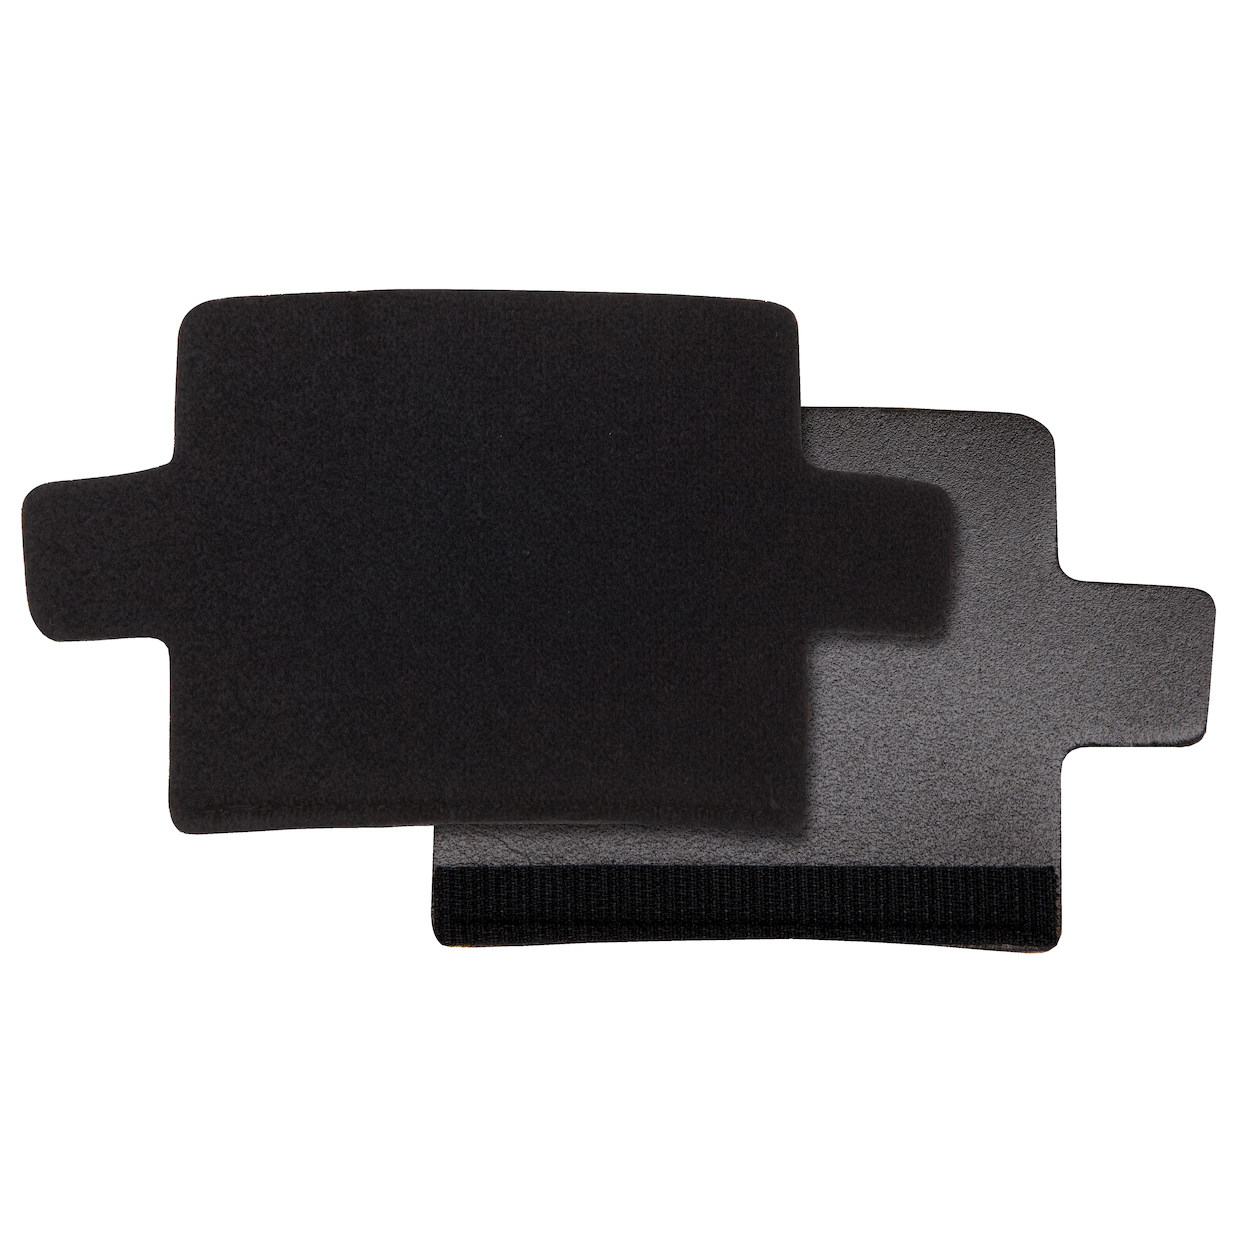 Dynamic Replacement Sweatband for all Dynamic Hard Hats